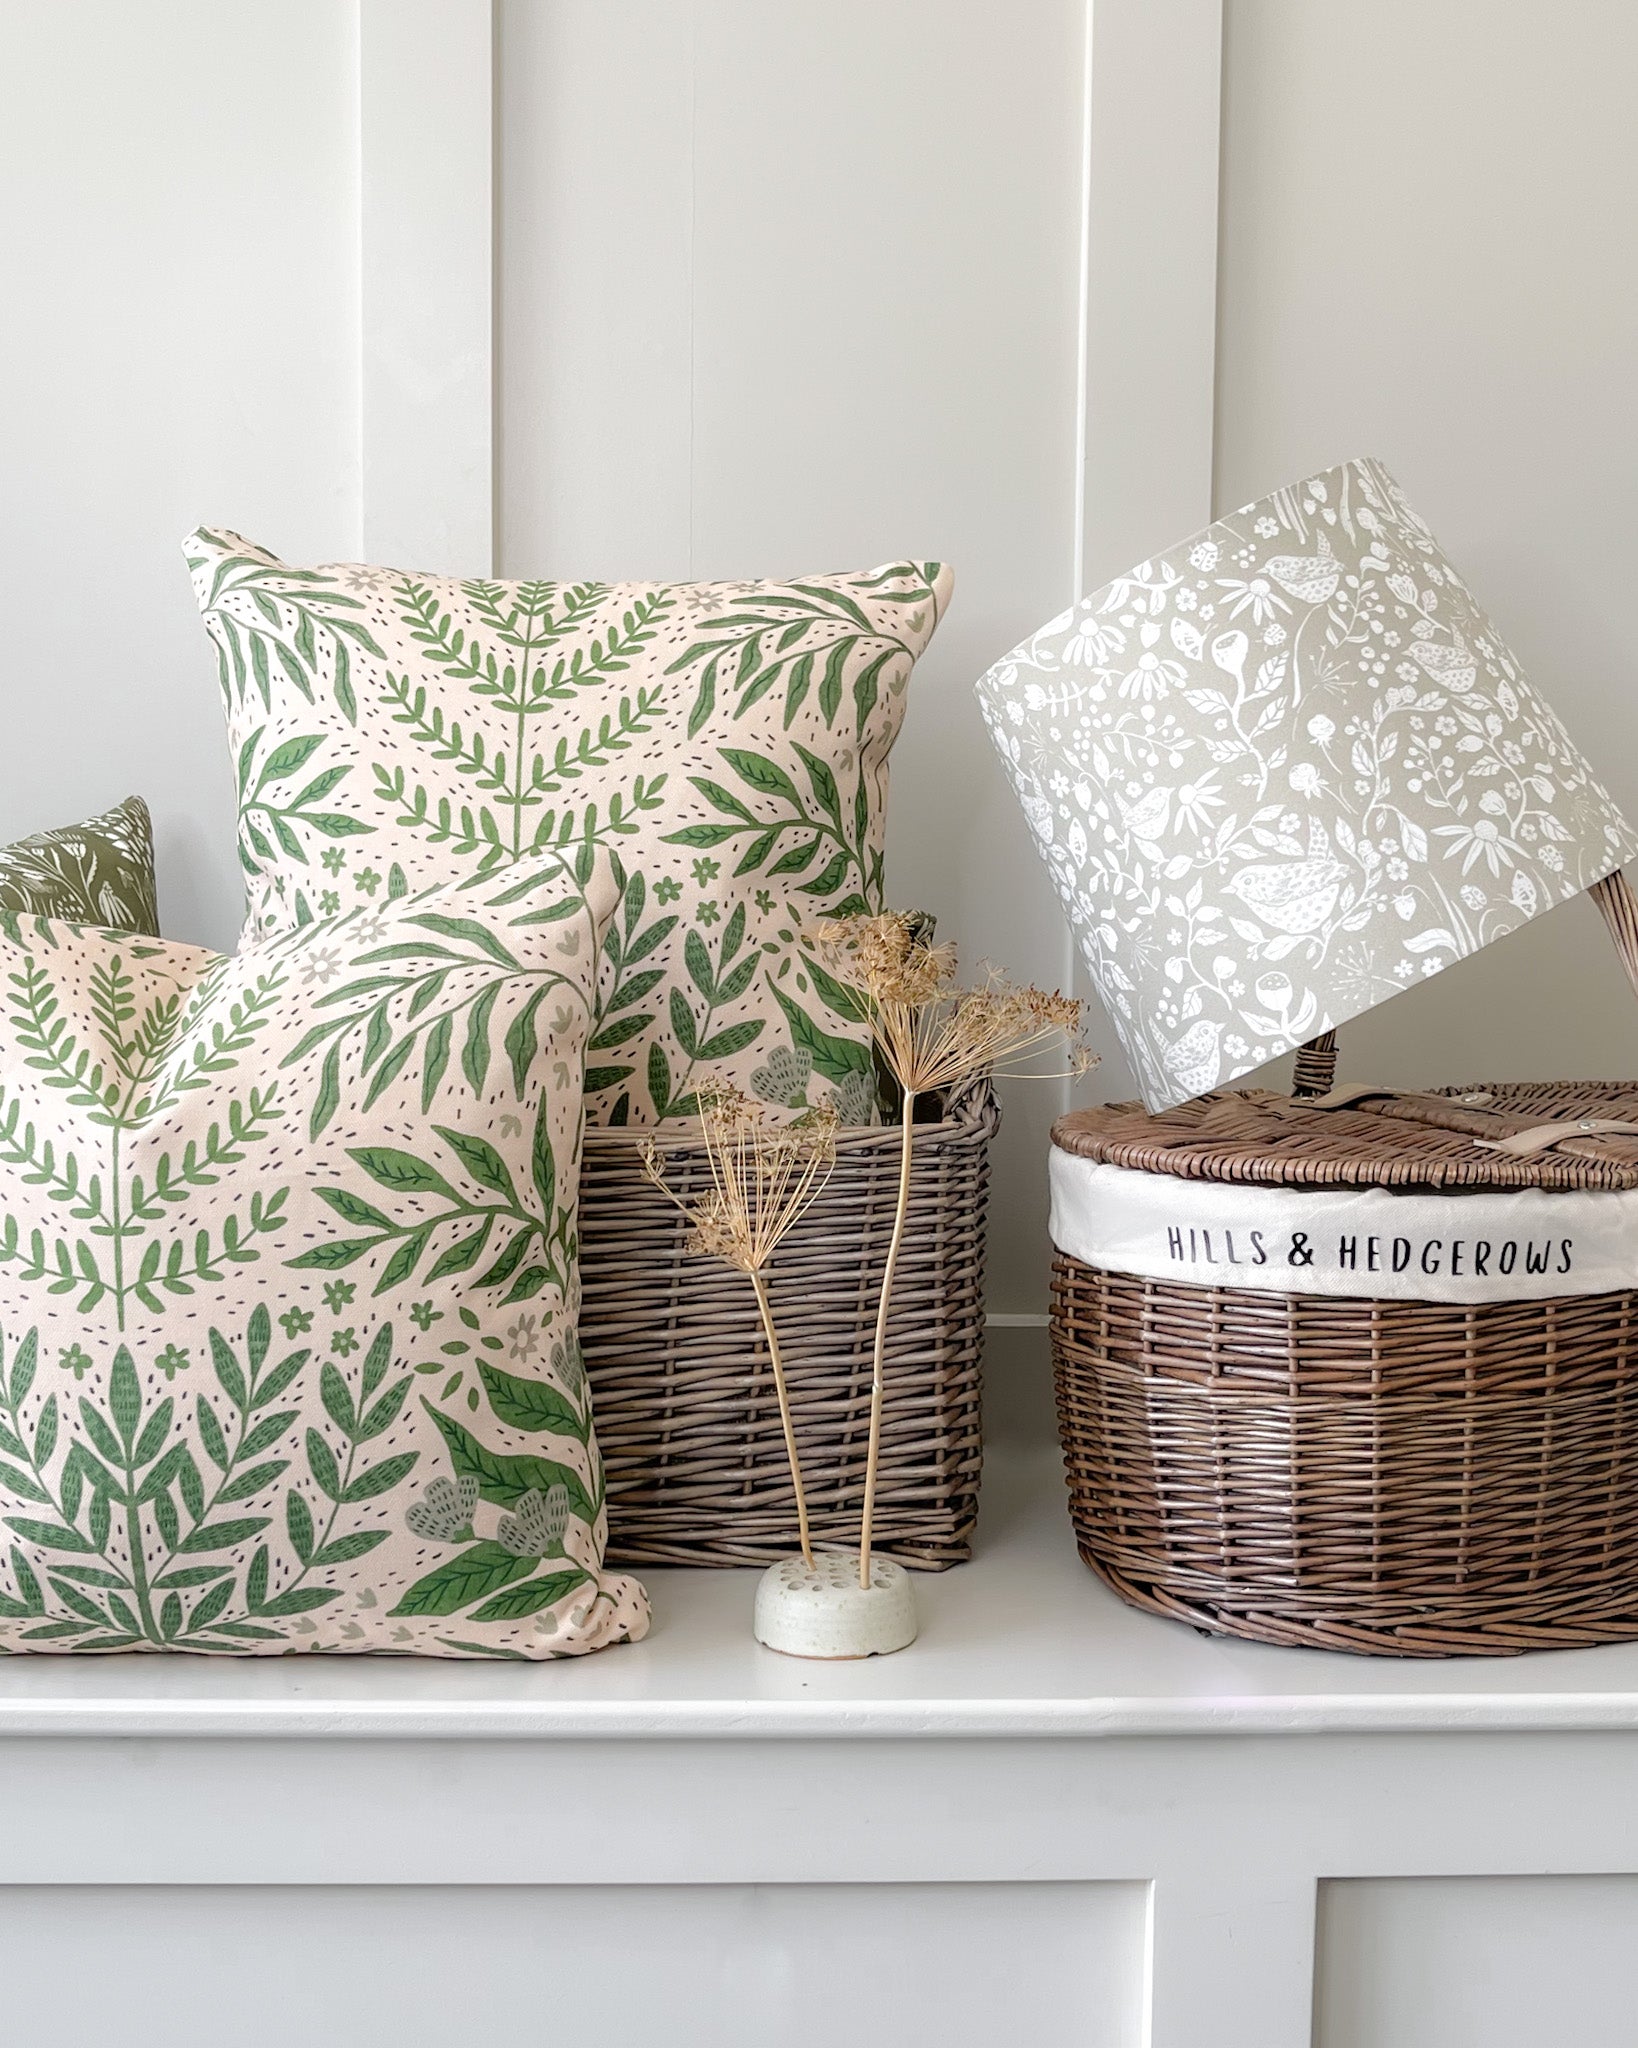 Handcrafted botanical-themed scatter cushions and lampshades from Hills & Hedgerows, adding natural charm to home decor.